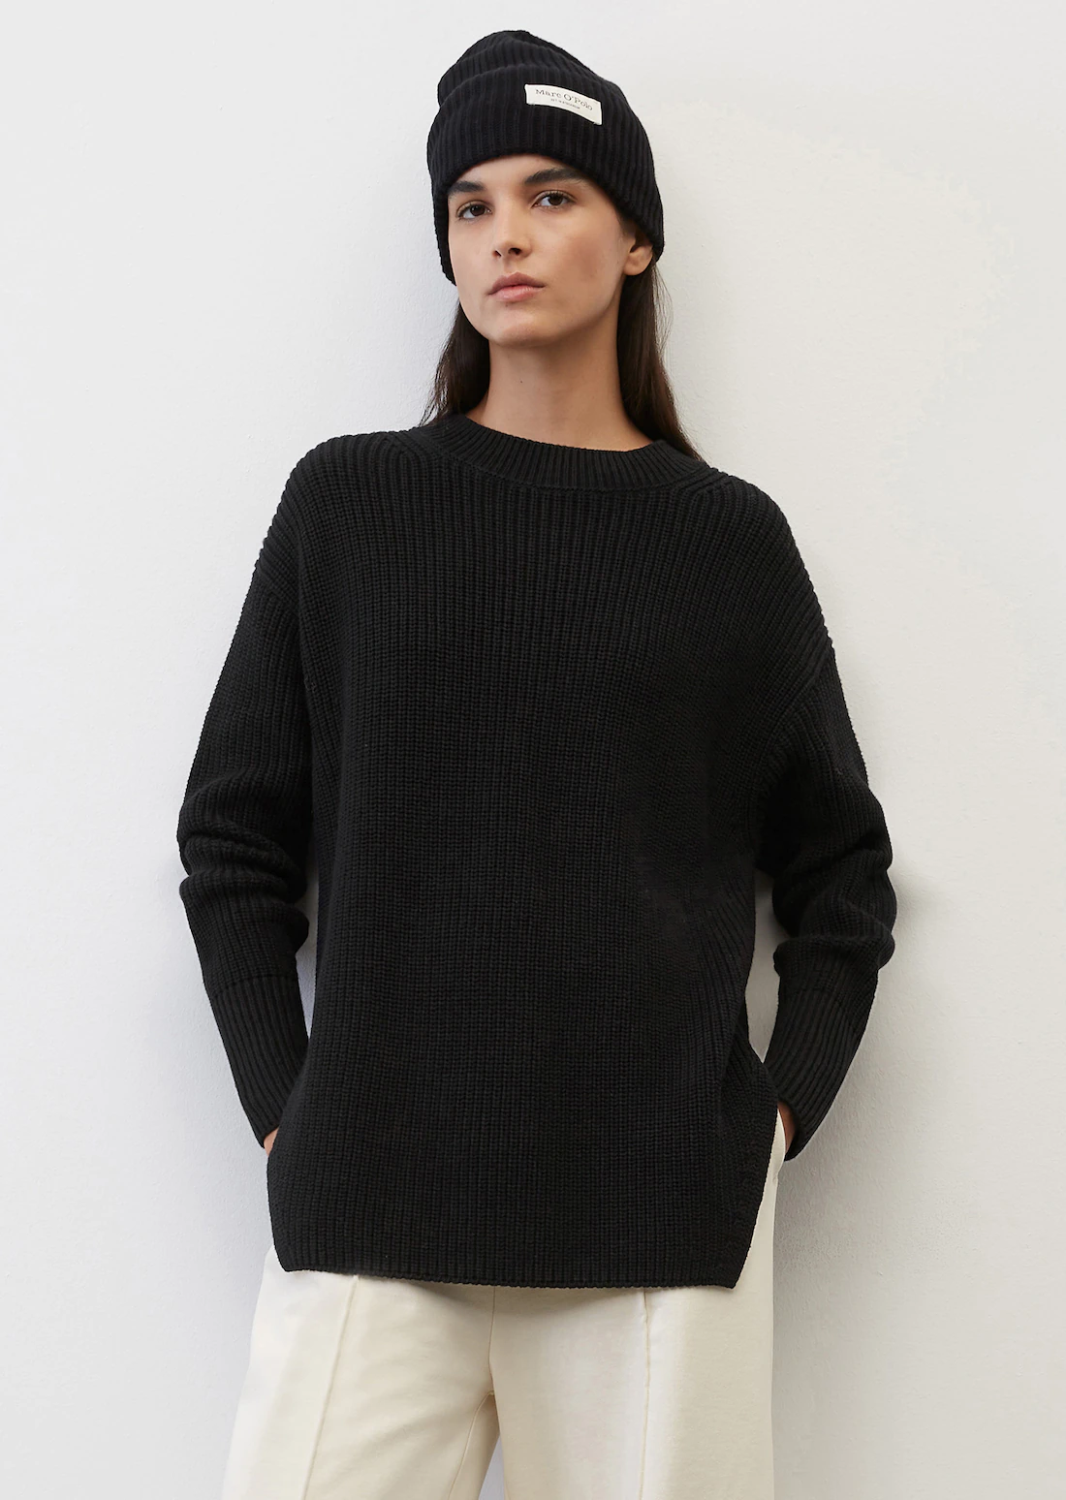 Marco Polo Round Neck Knit Jumper